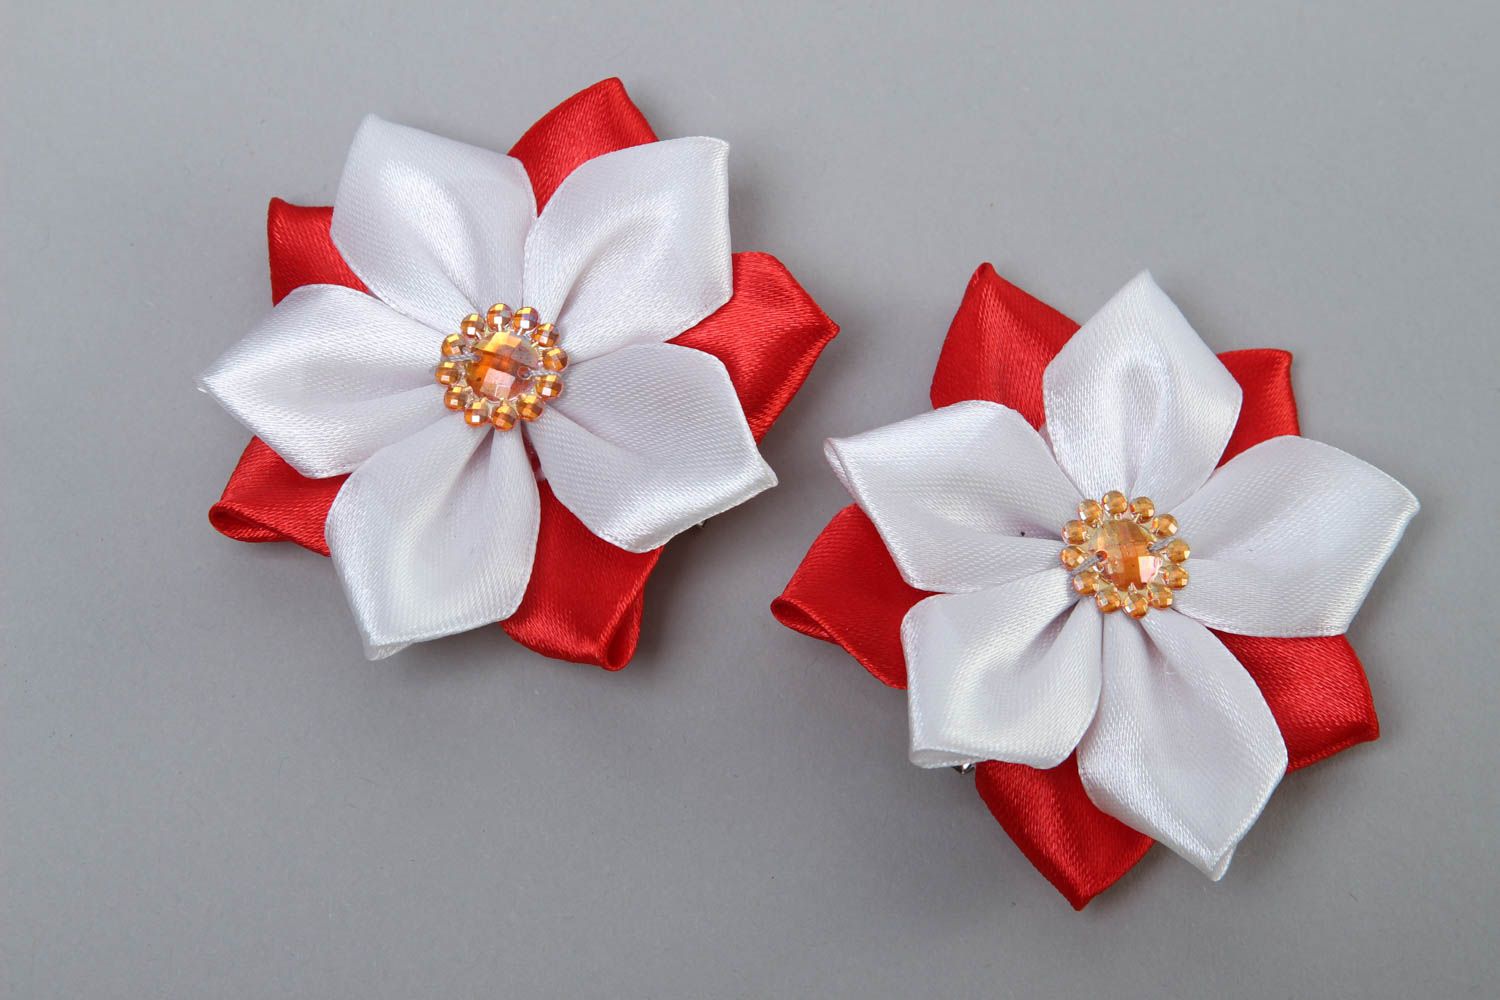 Handmade jewelry flower hair clips flowers for hair hair decorations cool gifts photo 2